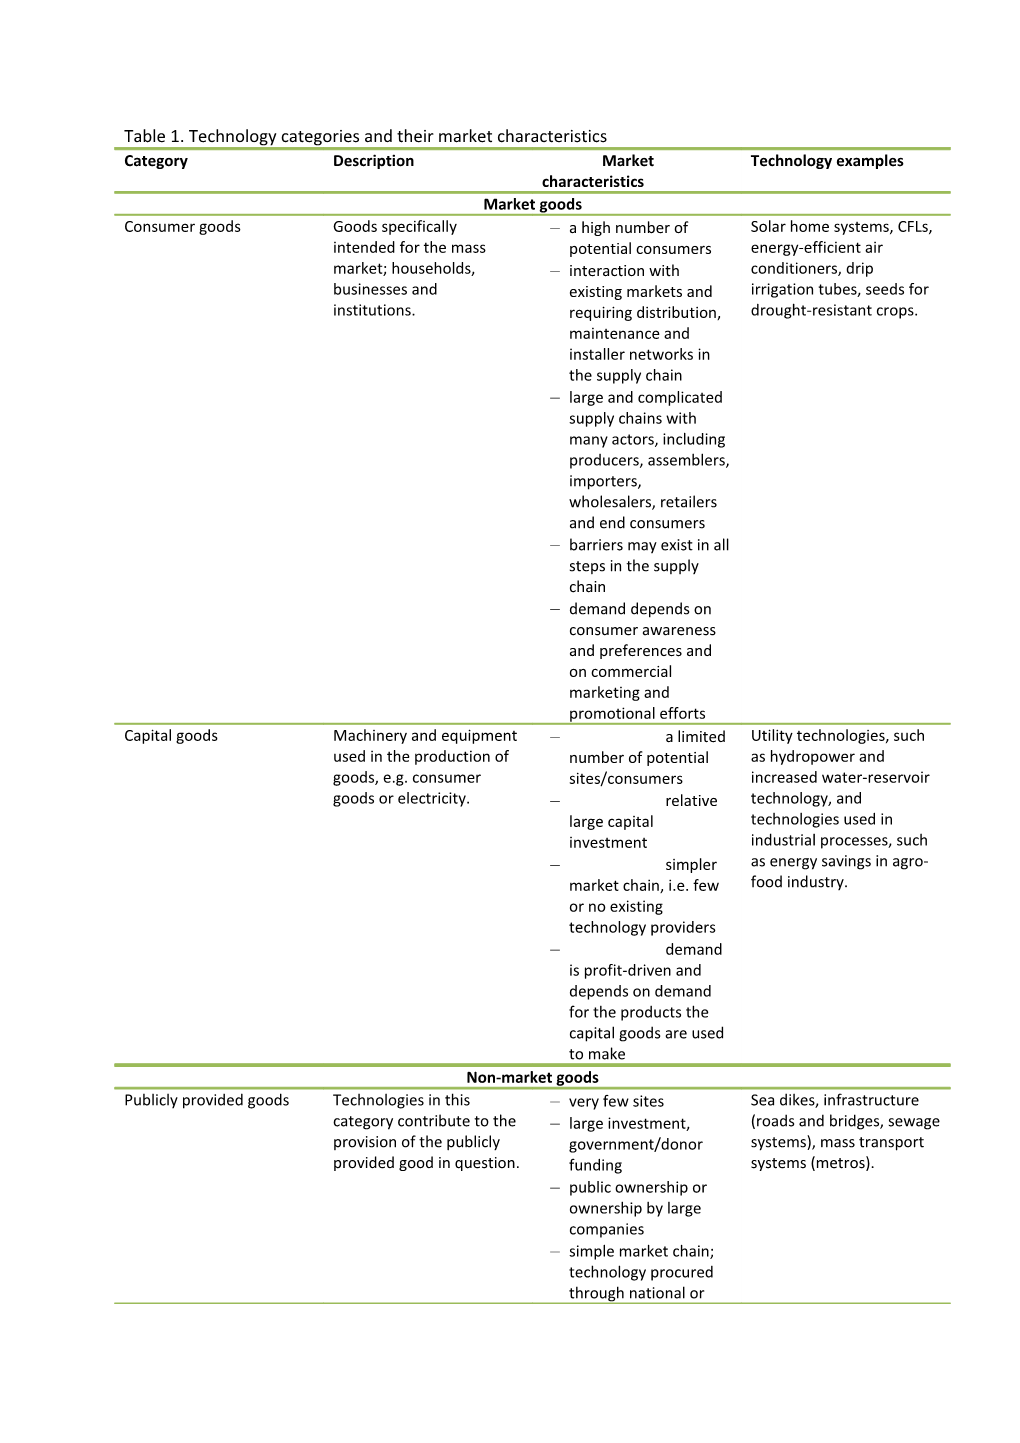 Table 1. Technology Categories and Their Market Characteristics